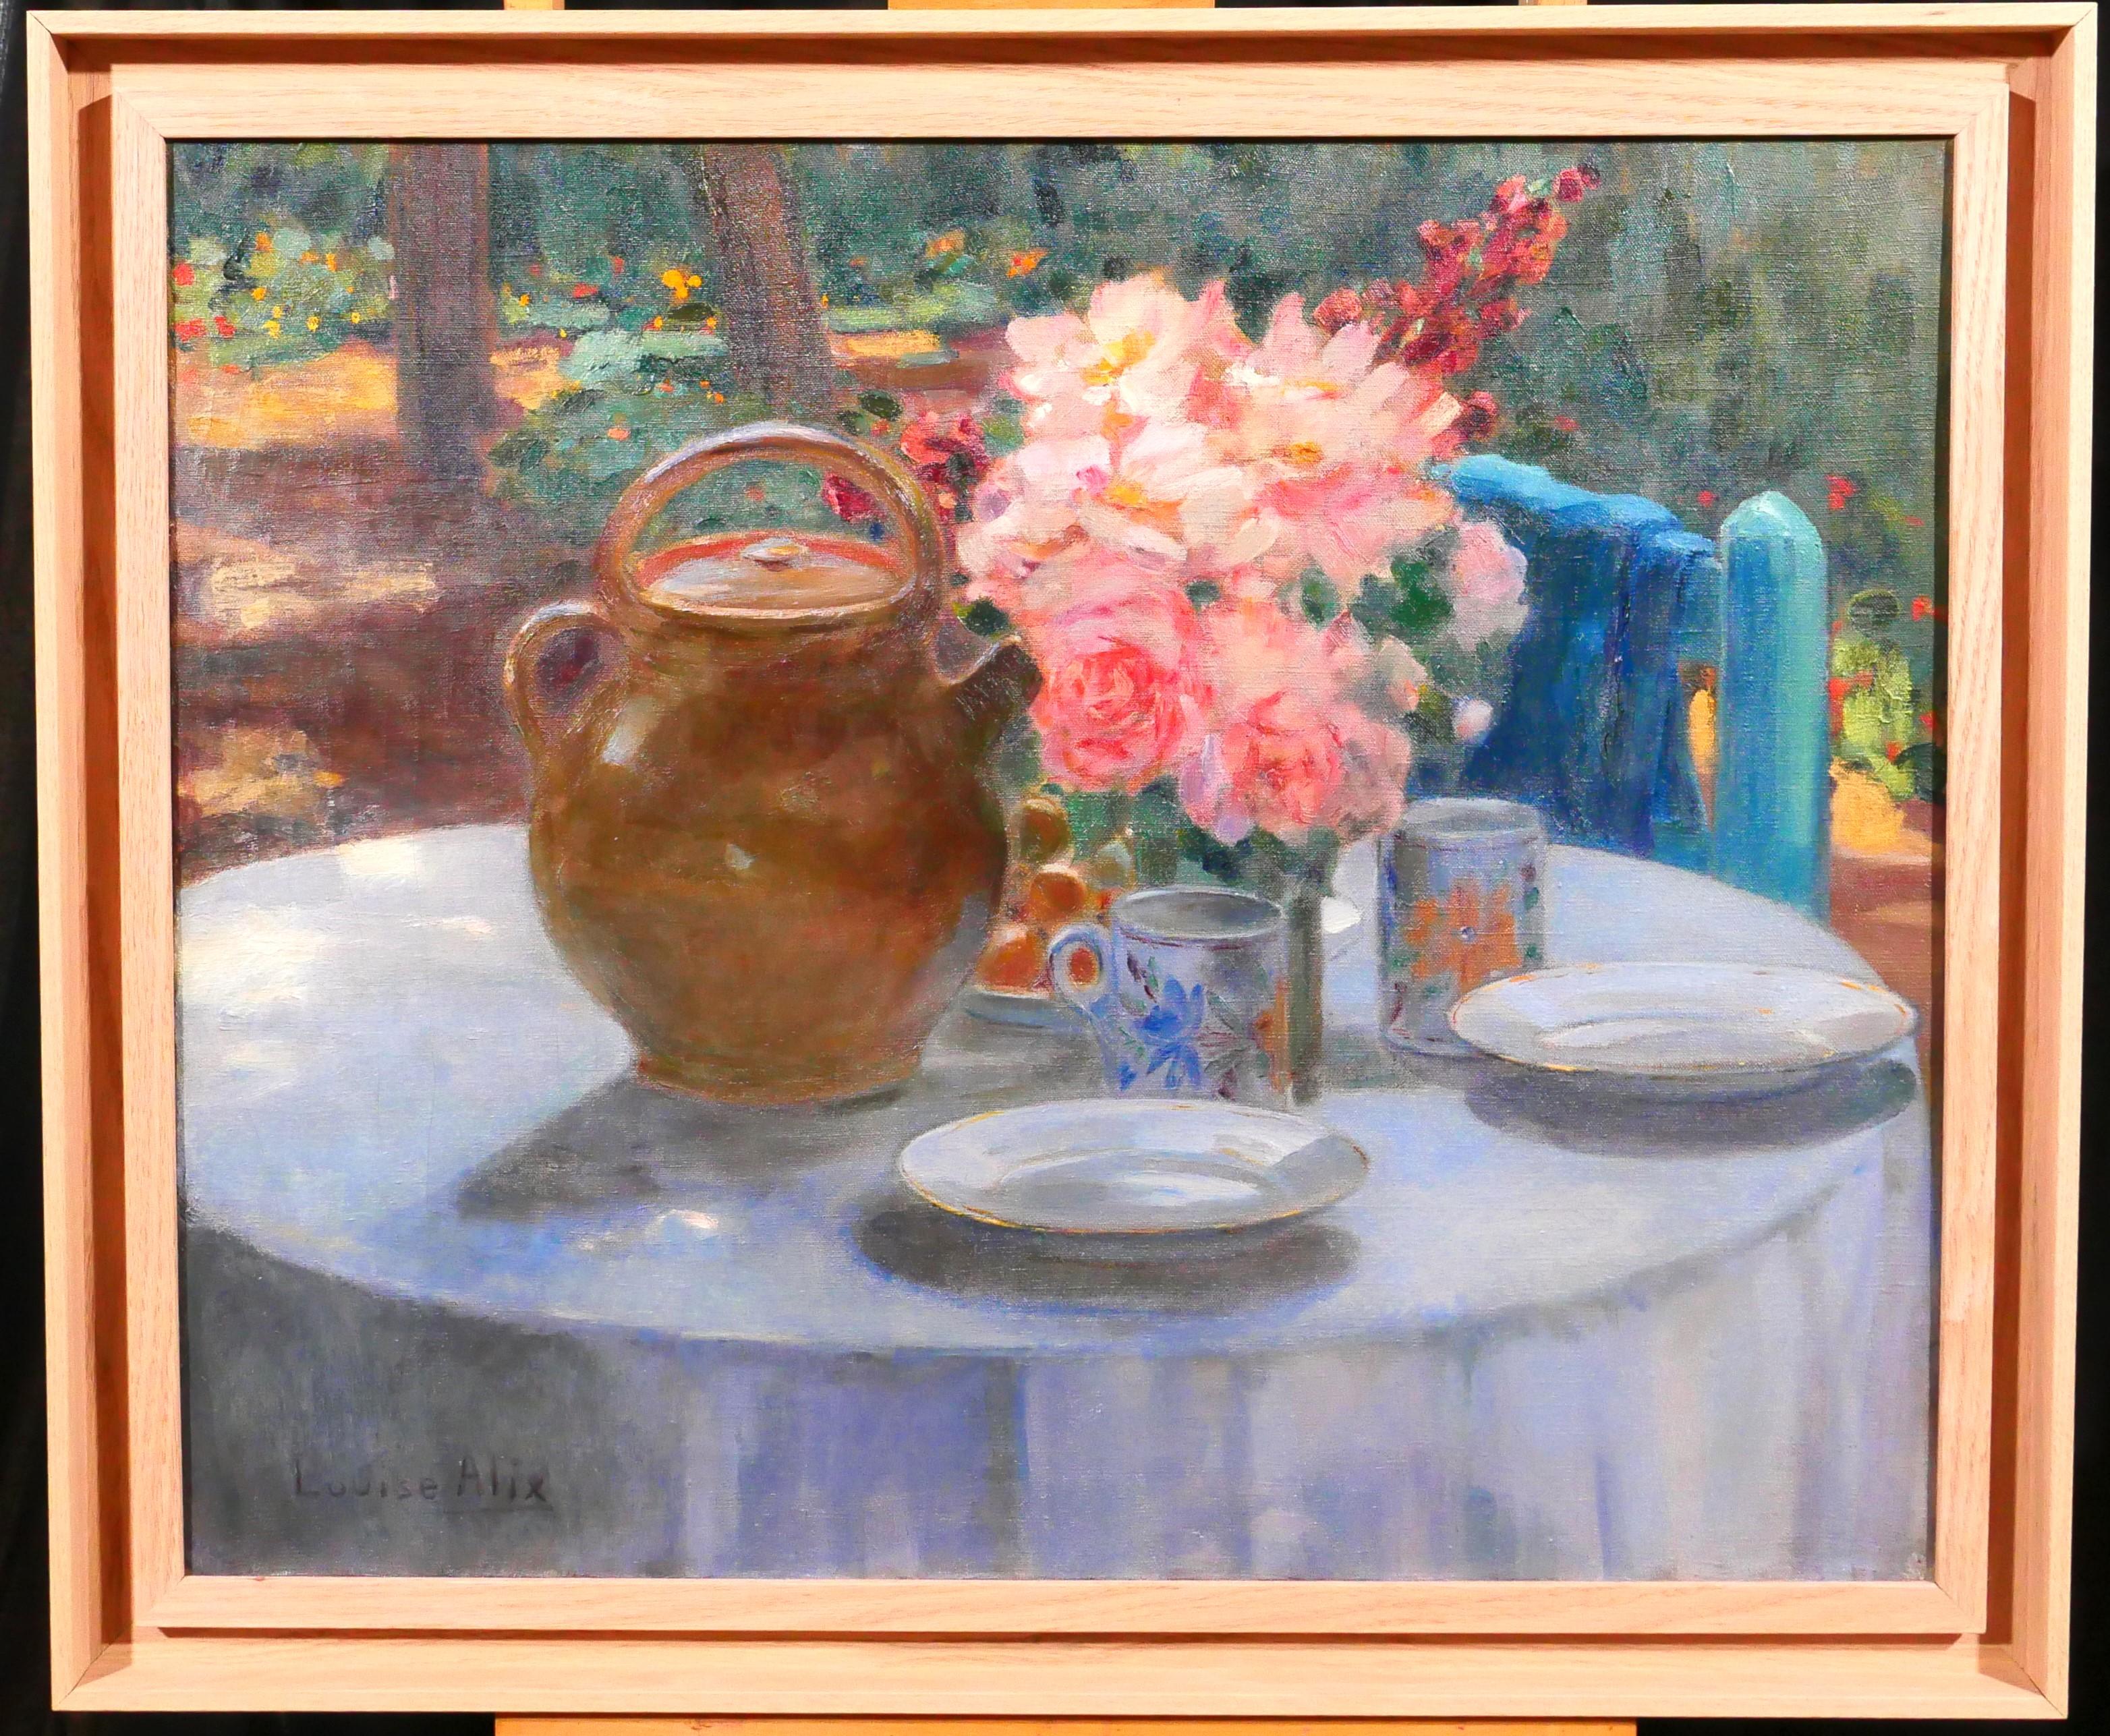 The table in the garden, flowers at tea time - Painting by Louise Alix